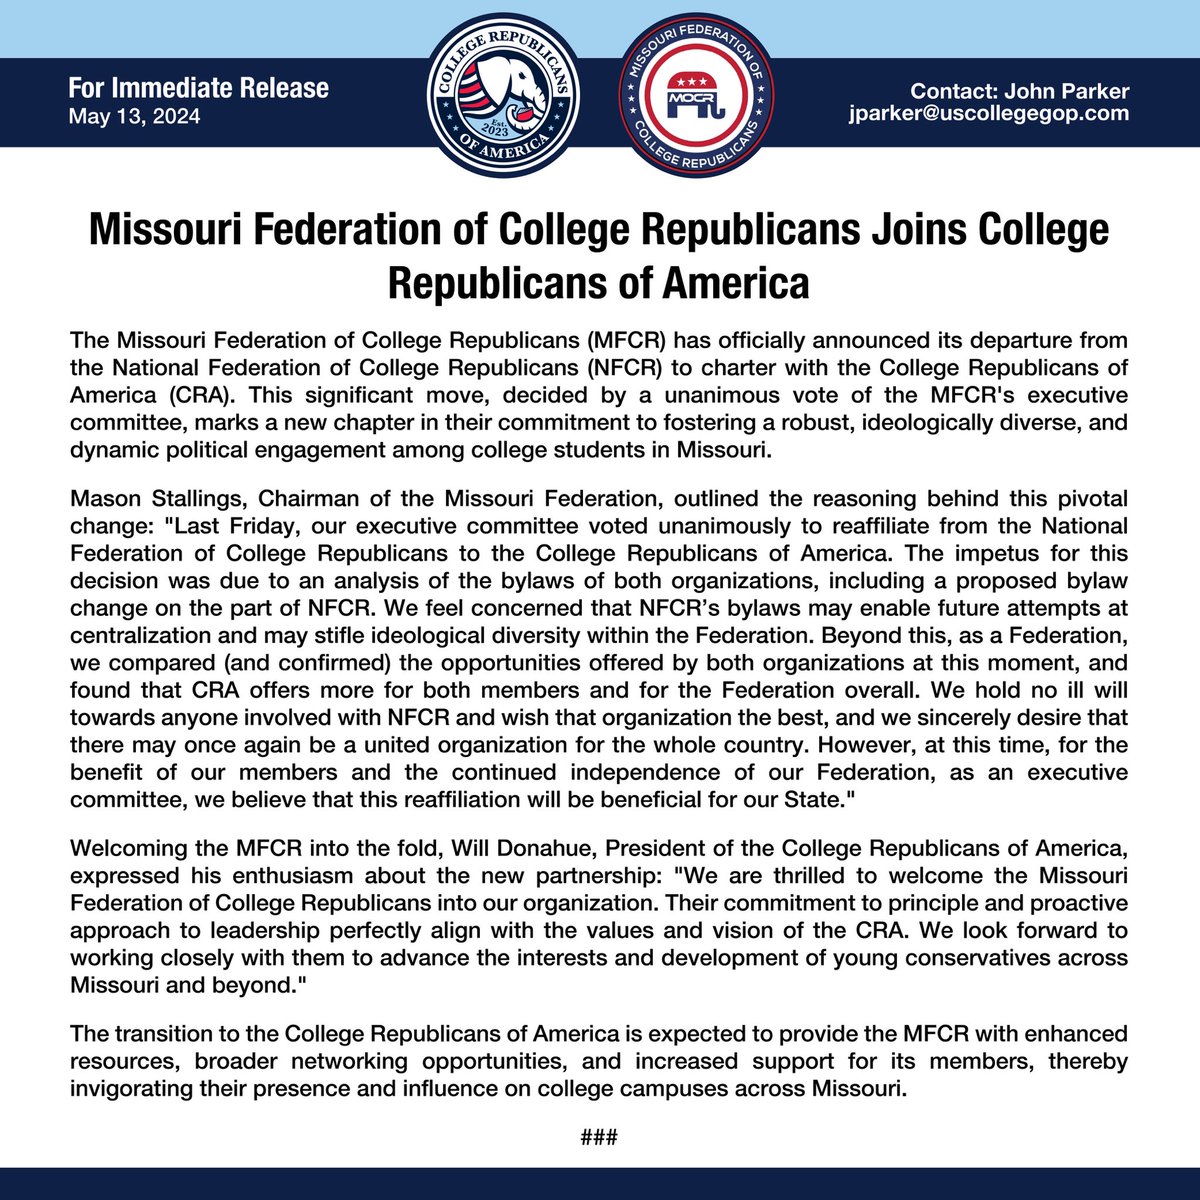 College Republicans of America is excited to welcome the Missouri College Republicans (@missouricr) into our organization! In only a year CRA has grown to be America’s largest national CR group, our coalition is growing stronger every day. We look forward to helping in Missouri!